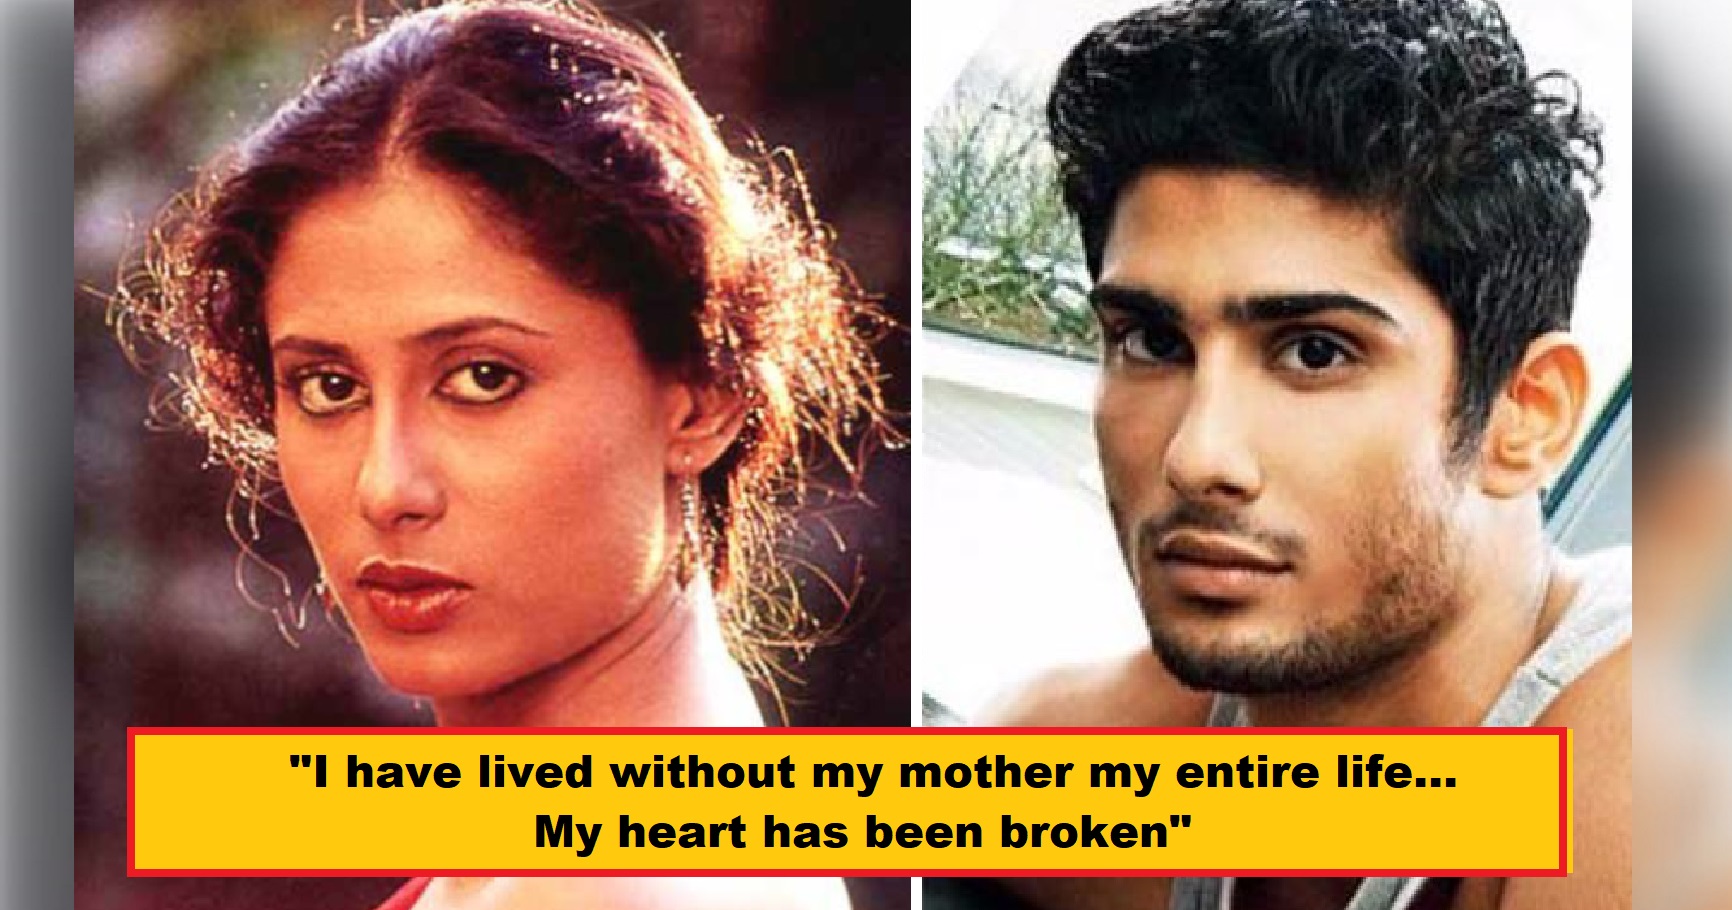 Smita Patil Birth Anniversary: Son Prateik Babbar Says It Is An “Extremely Vulnerable Day” For Him